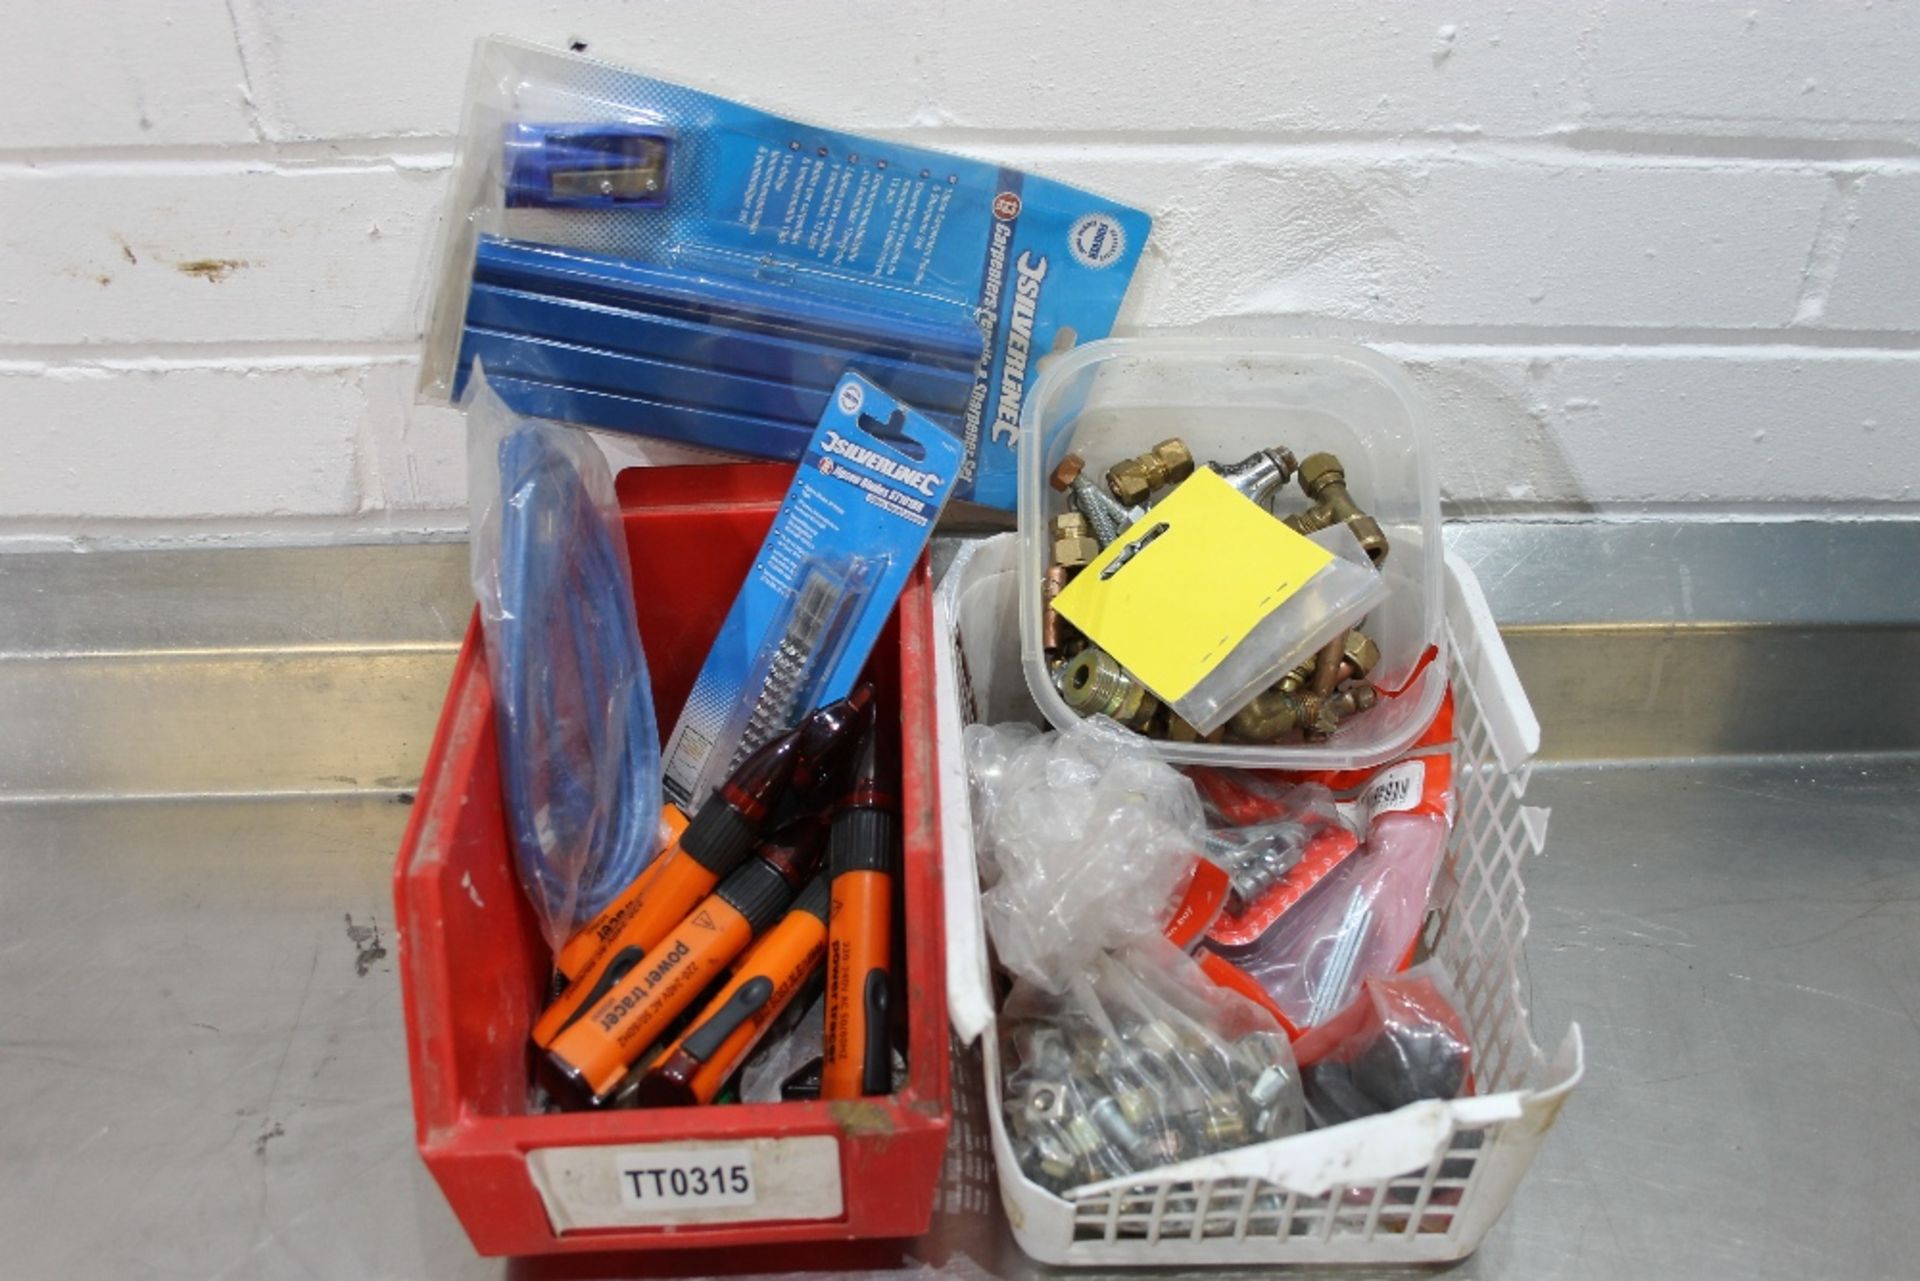 2 Small Tubs various Nuts, Bolts, Brass Fittings, Carpenter Pencils B&Q Power Tracer Pens